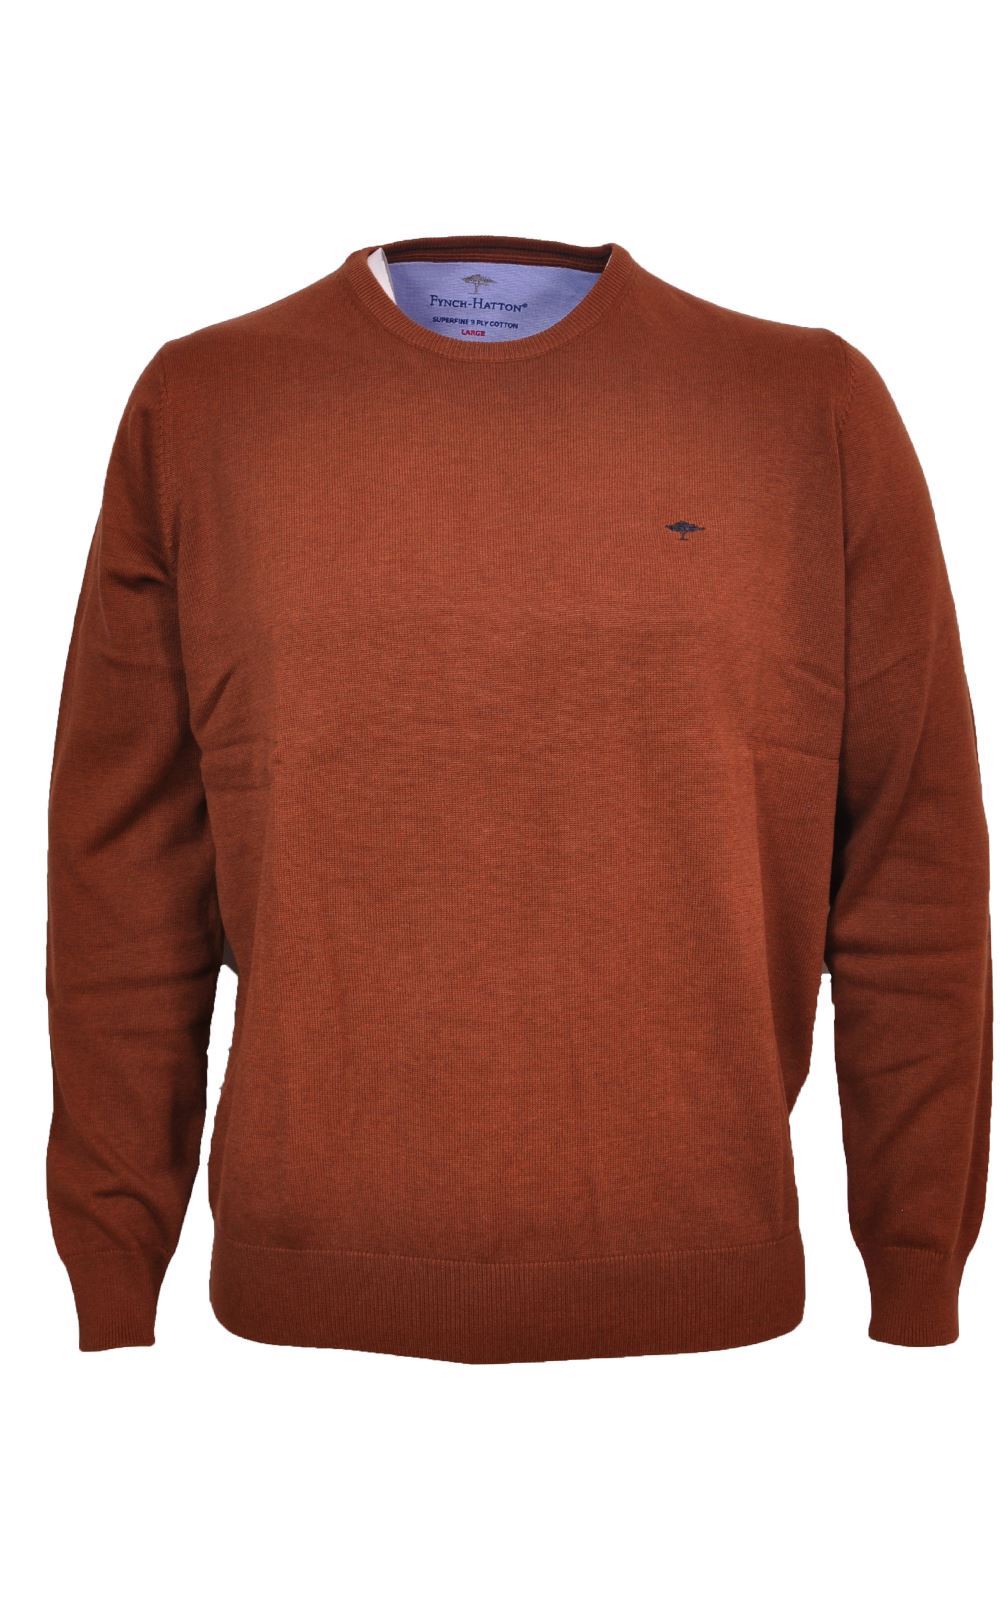 S&T Moore. Fynch-Hatton Crew Neck 1213-210 Pullover